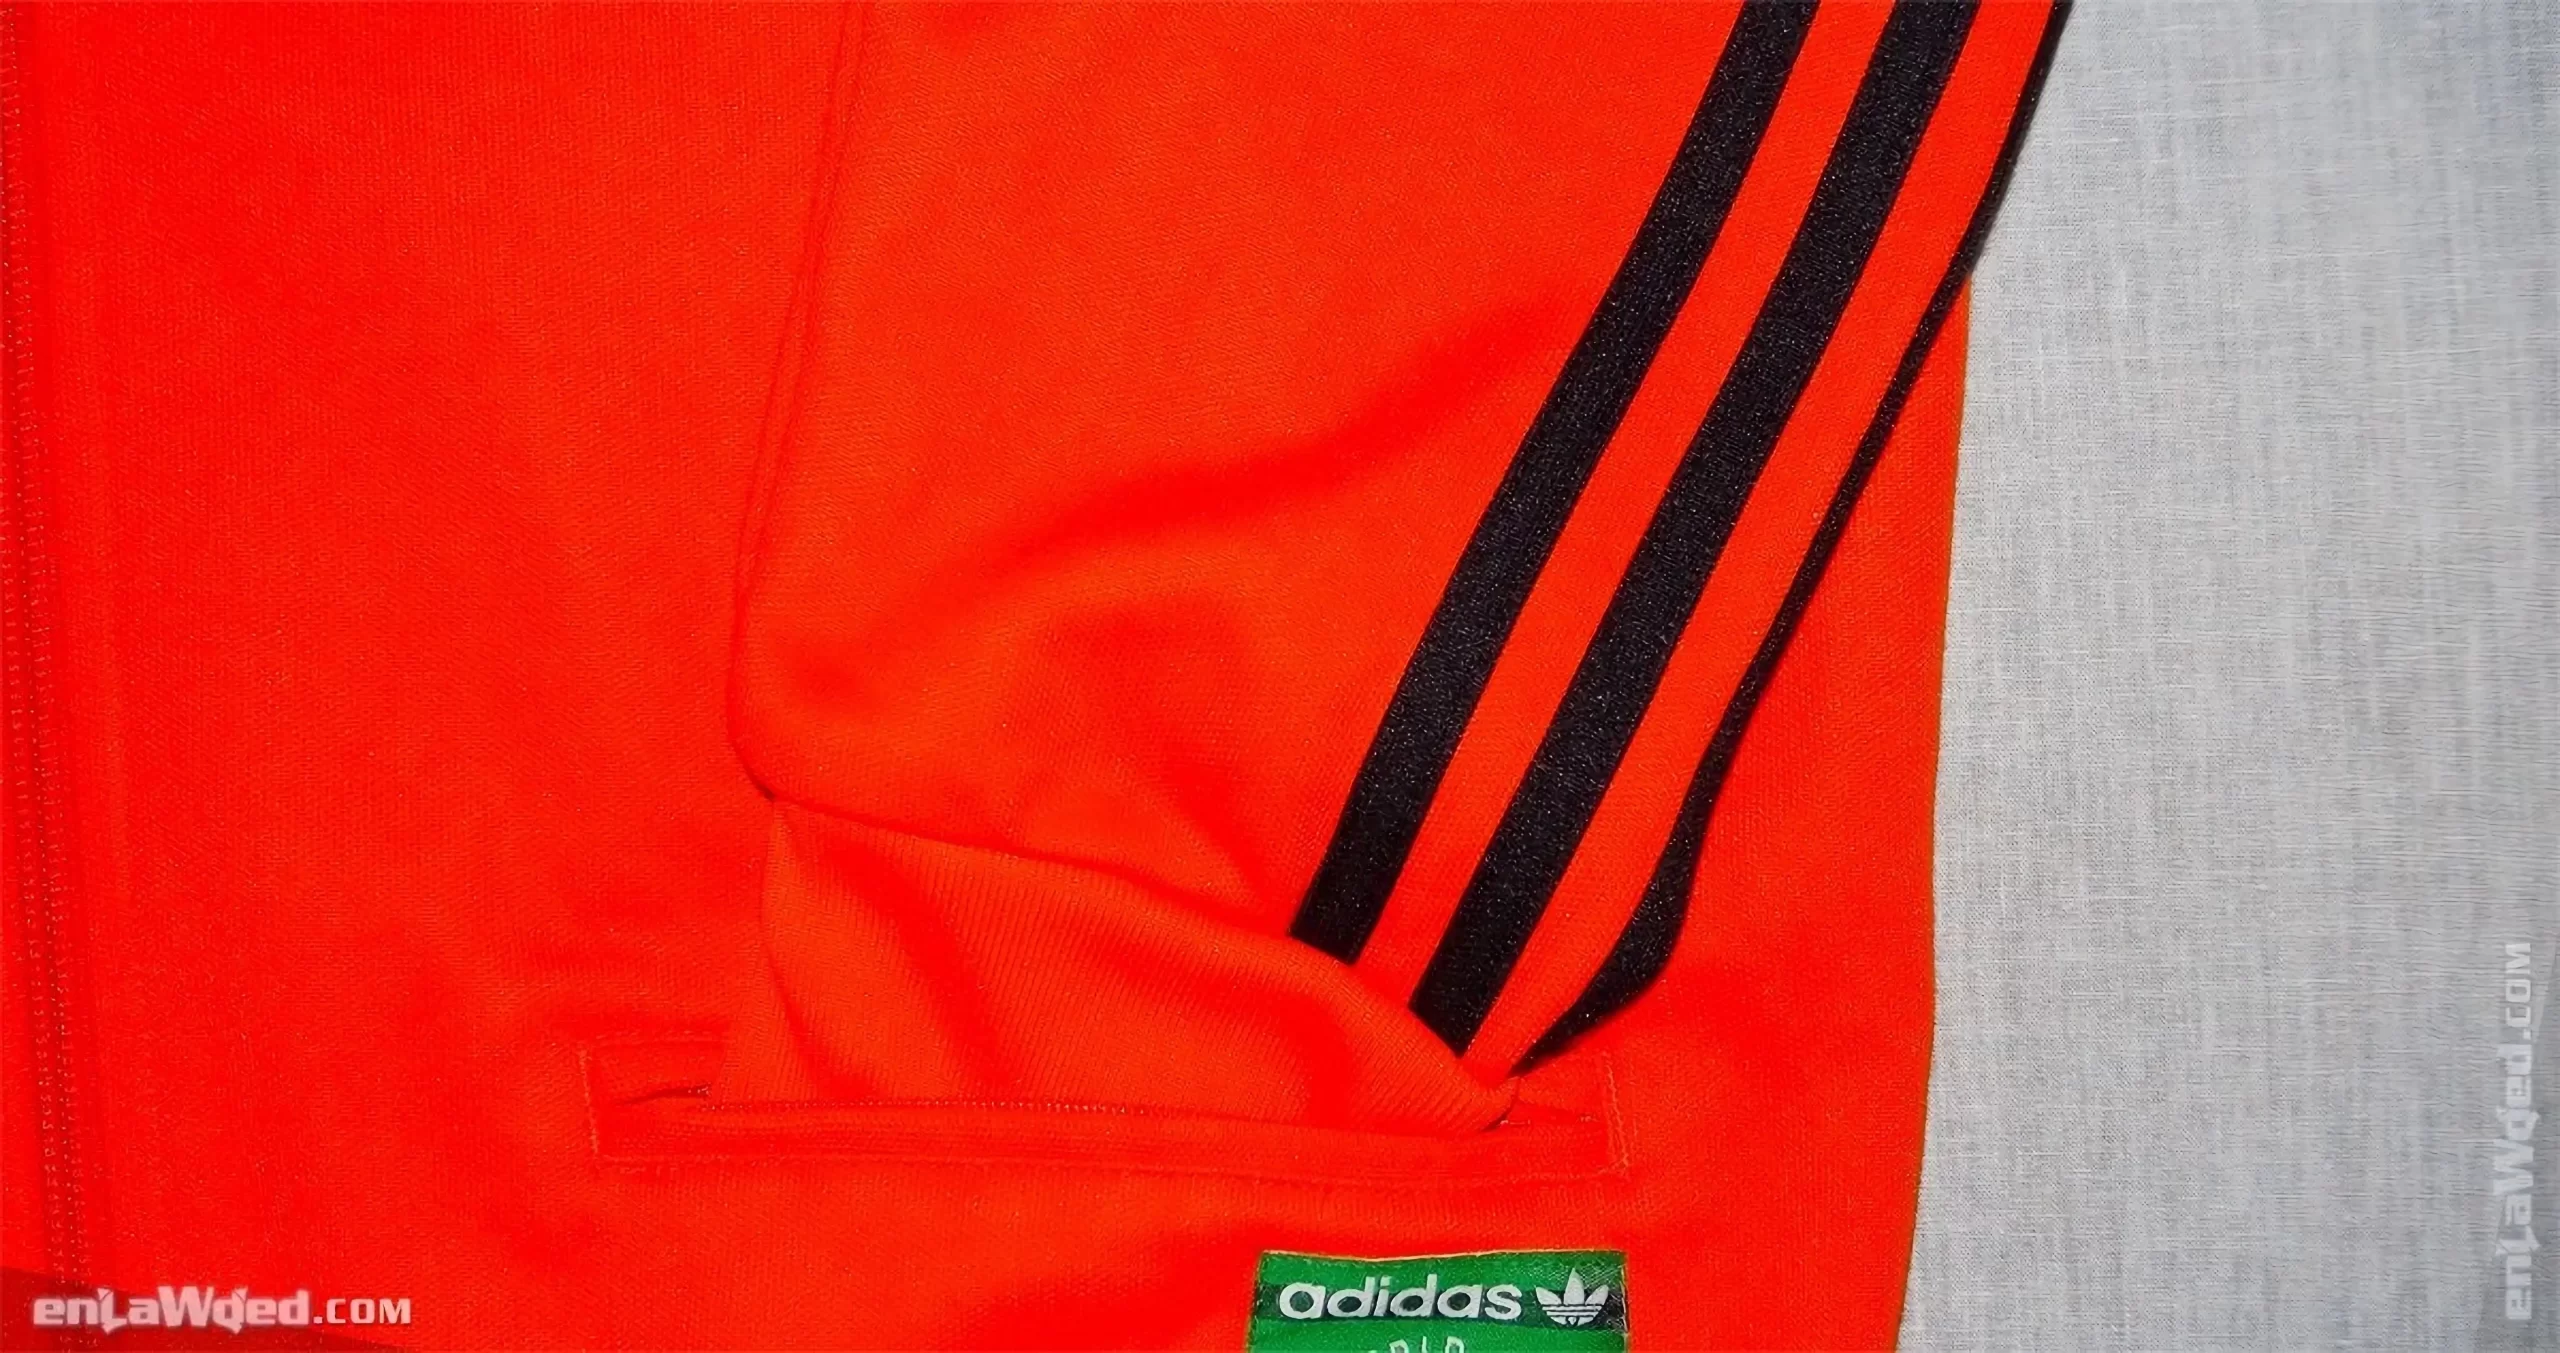 13th interior view of the Adidas Originals Netherlands 1974 Track Top